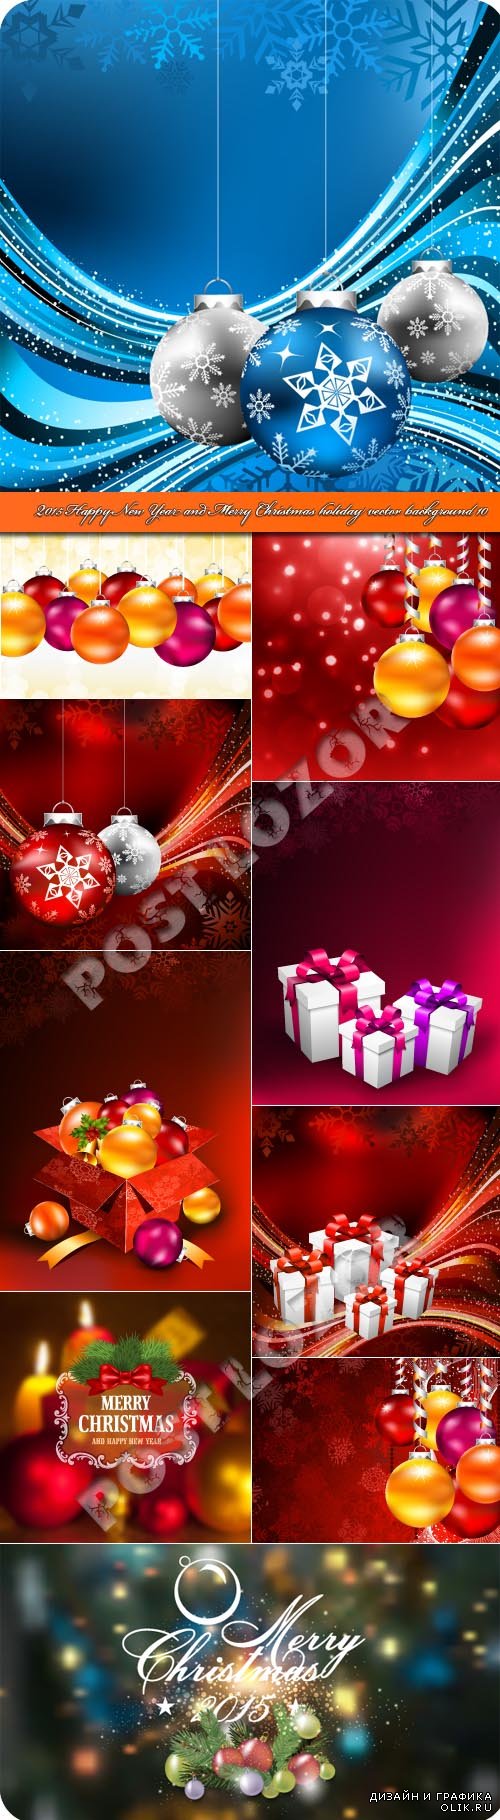 2015 Happy New Year and Merry Christmas holiday vector background 10